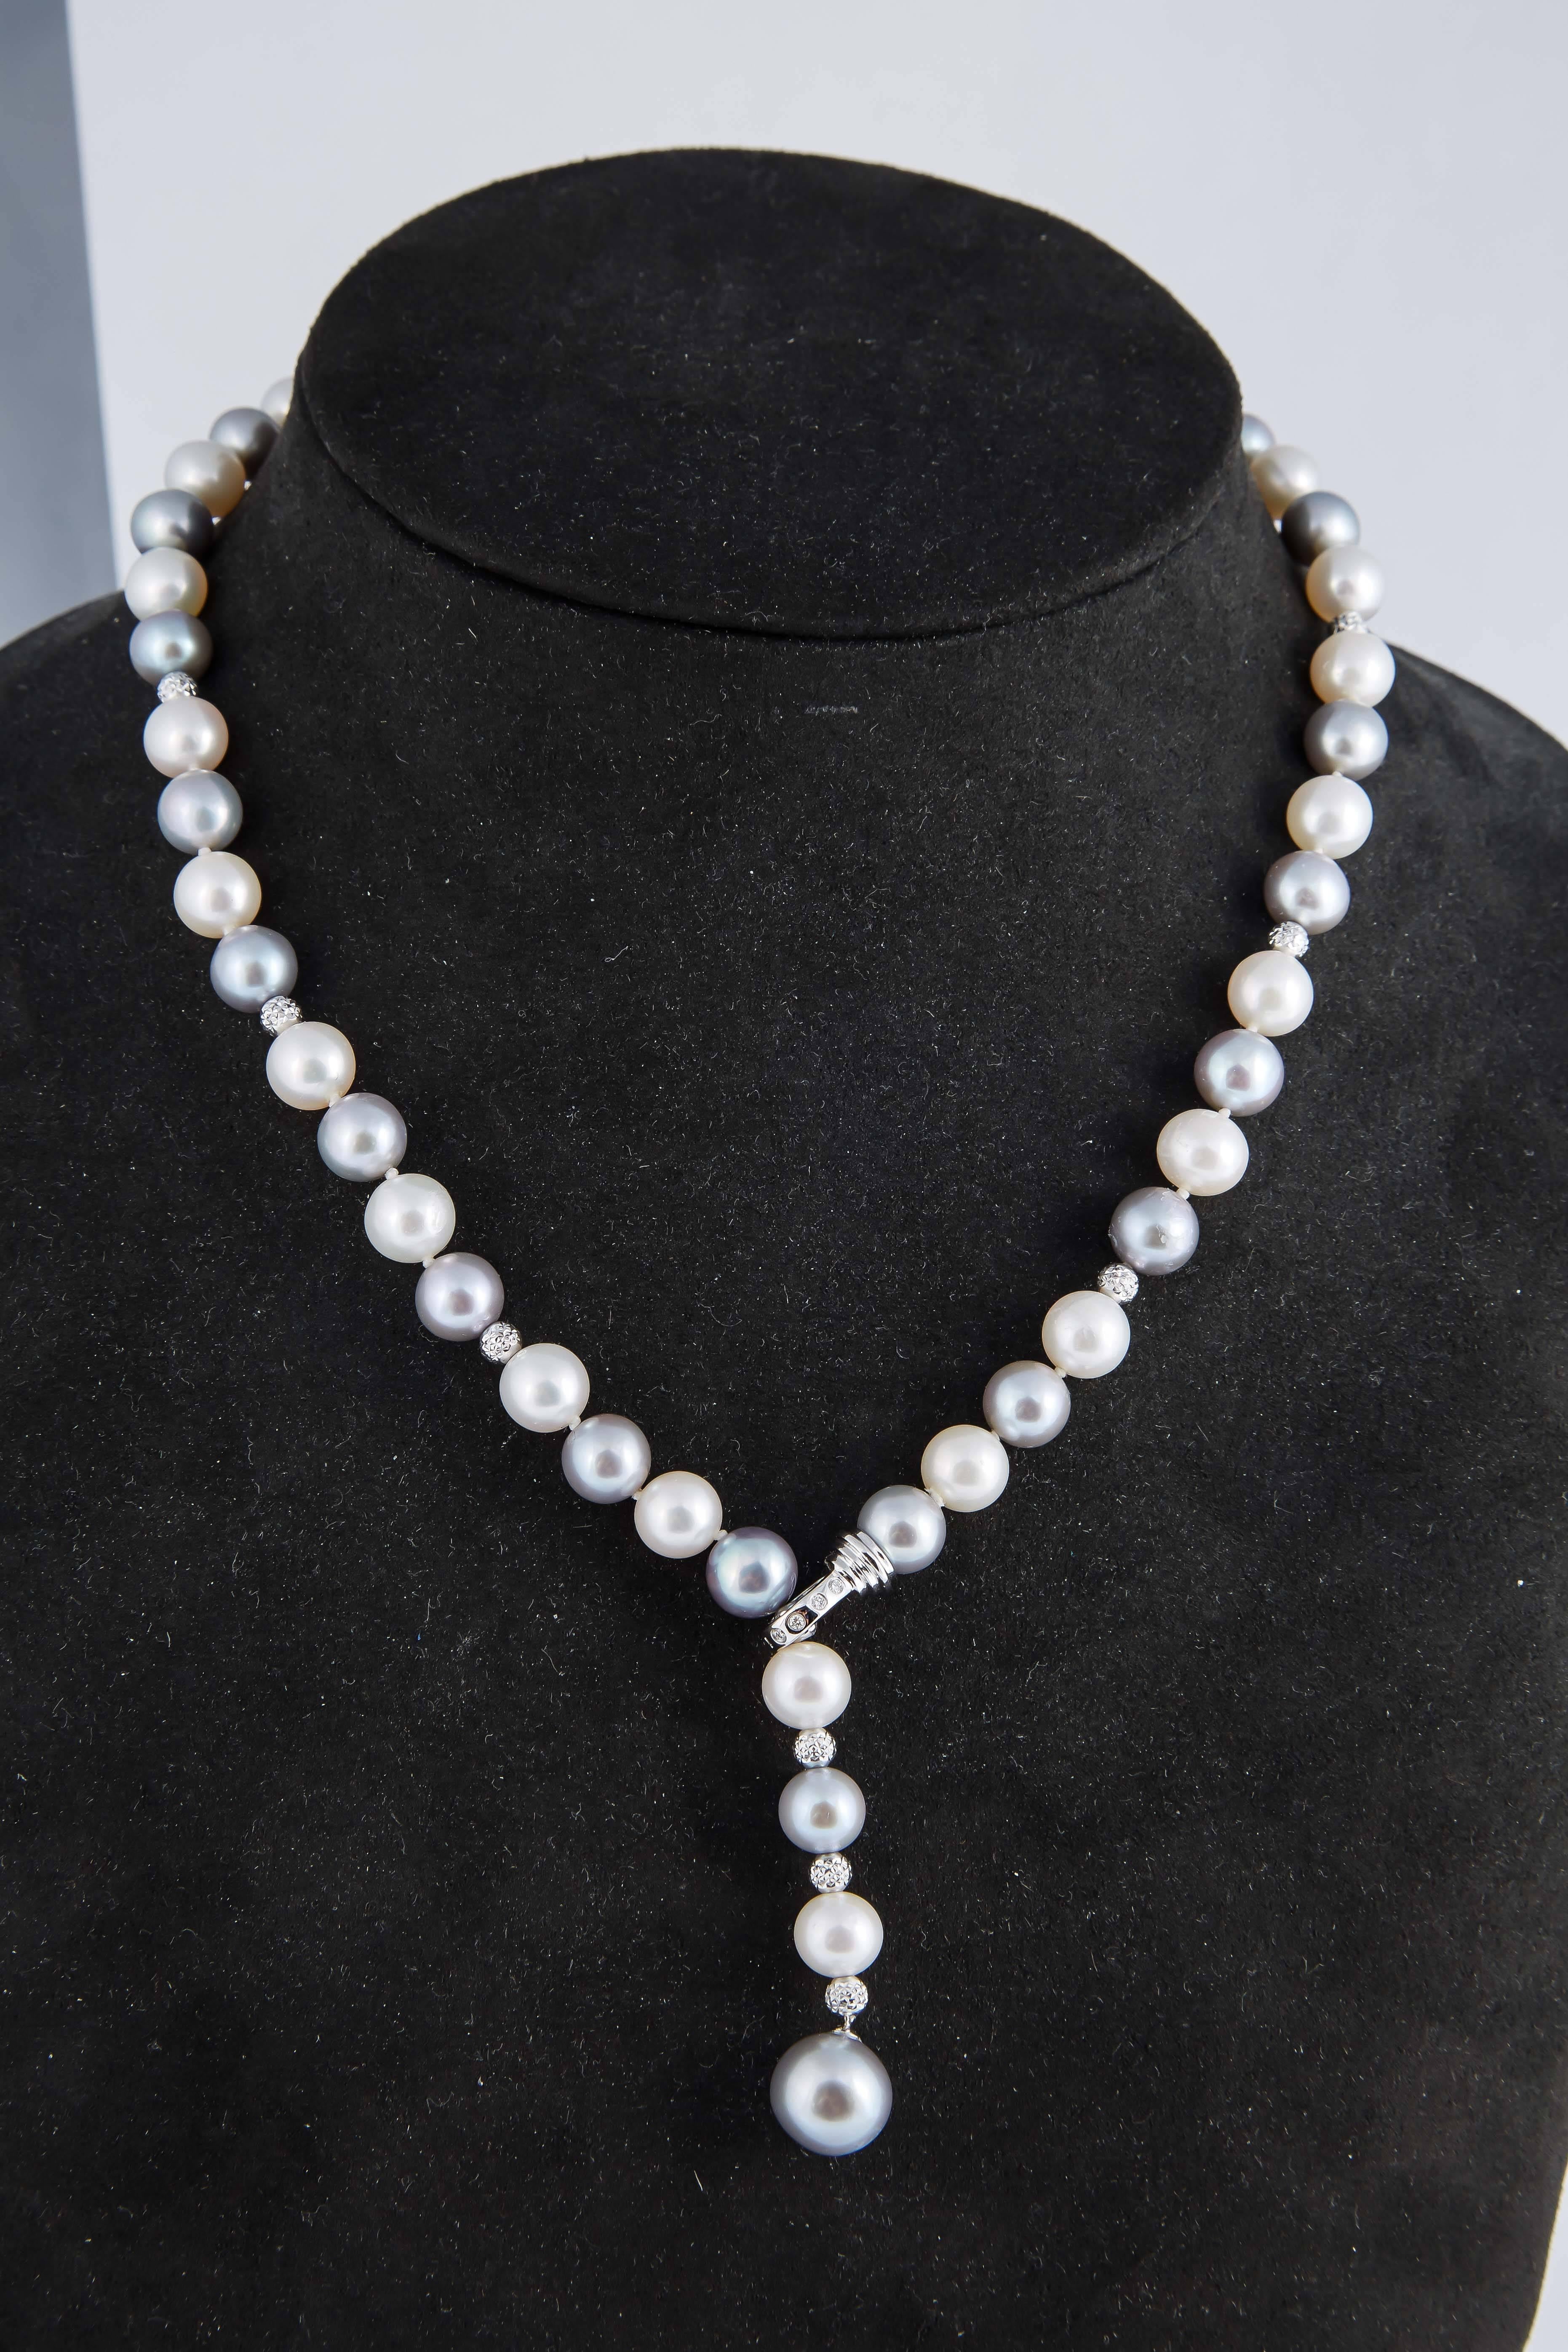 Fresh Water Pearls in Black & White 
Necklace: 8.0-11.0 mm pearls-18K -0.07 cts.
Bracelet: 8.0 mm Fresh Water Pearls
Earrings: Fresh Water
Gold Beads in 18K cut to sparkle to look like Diamonds.